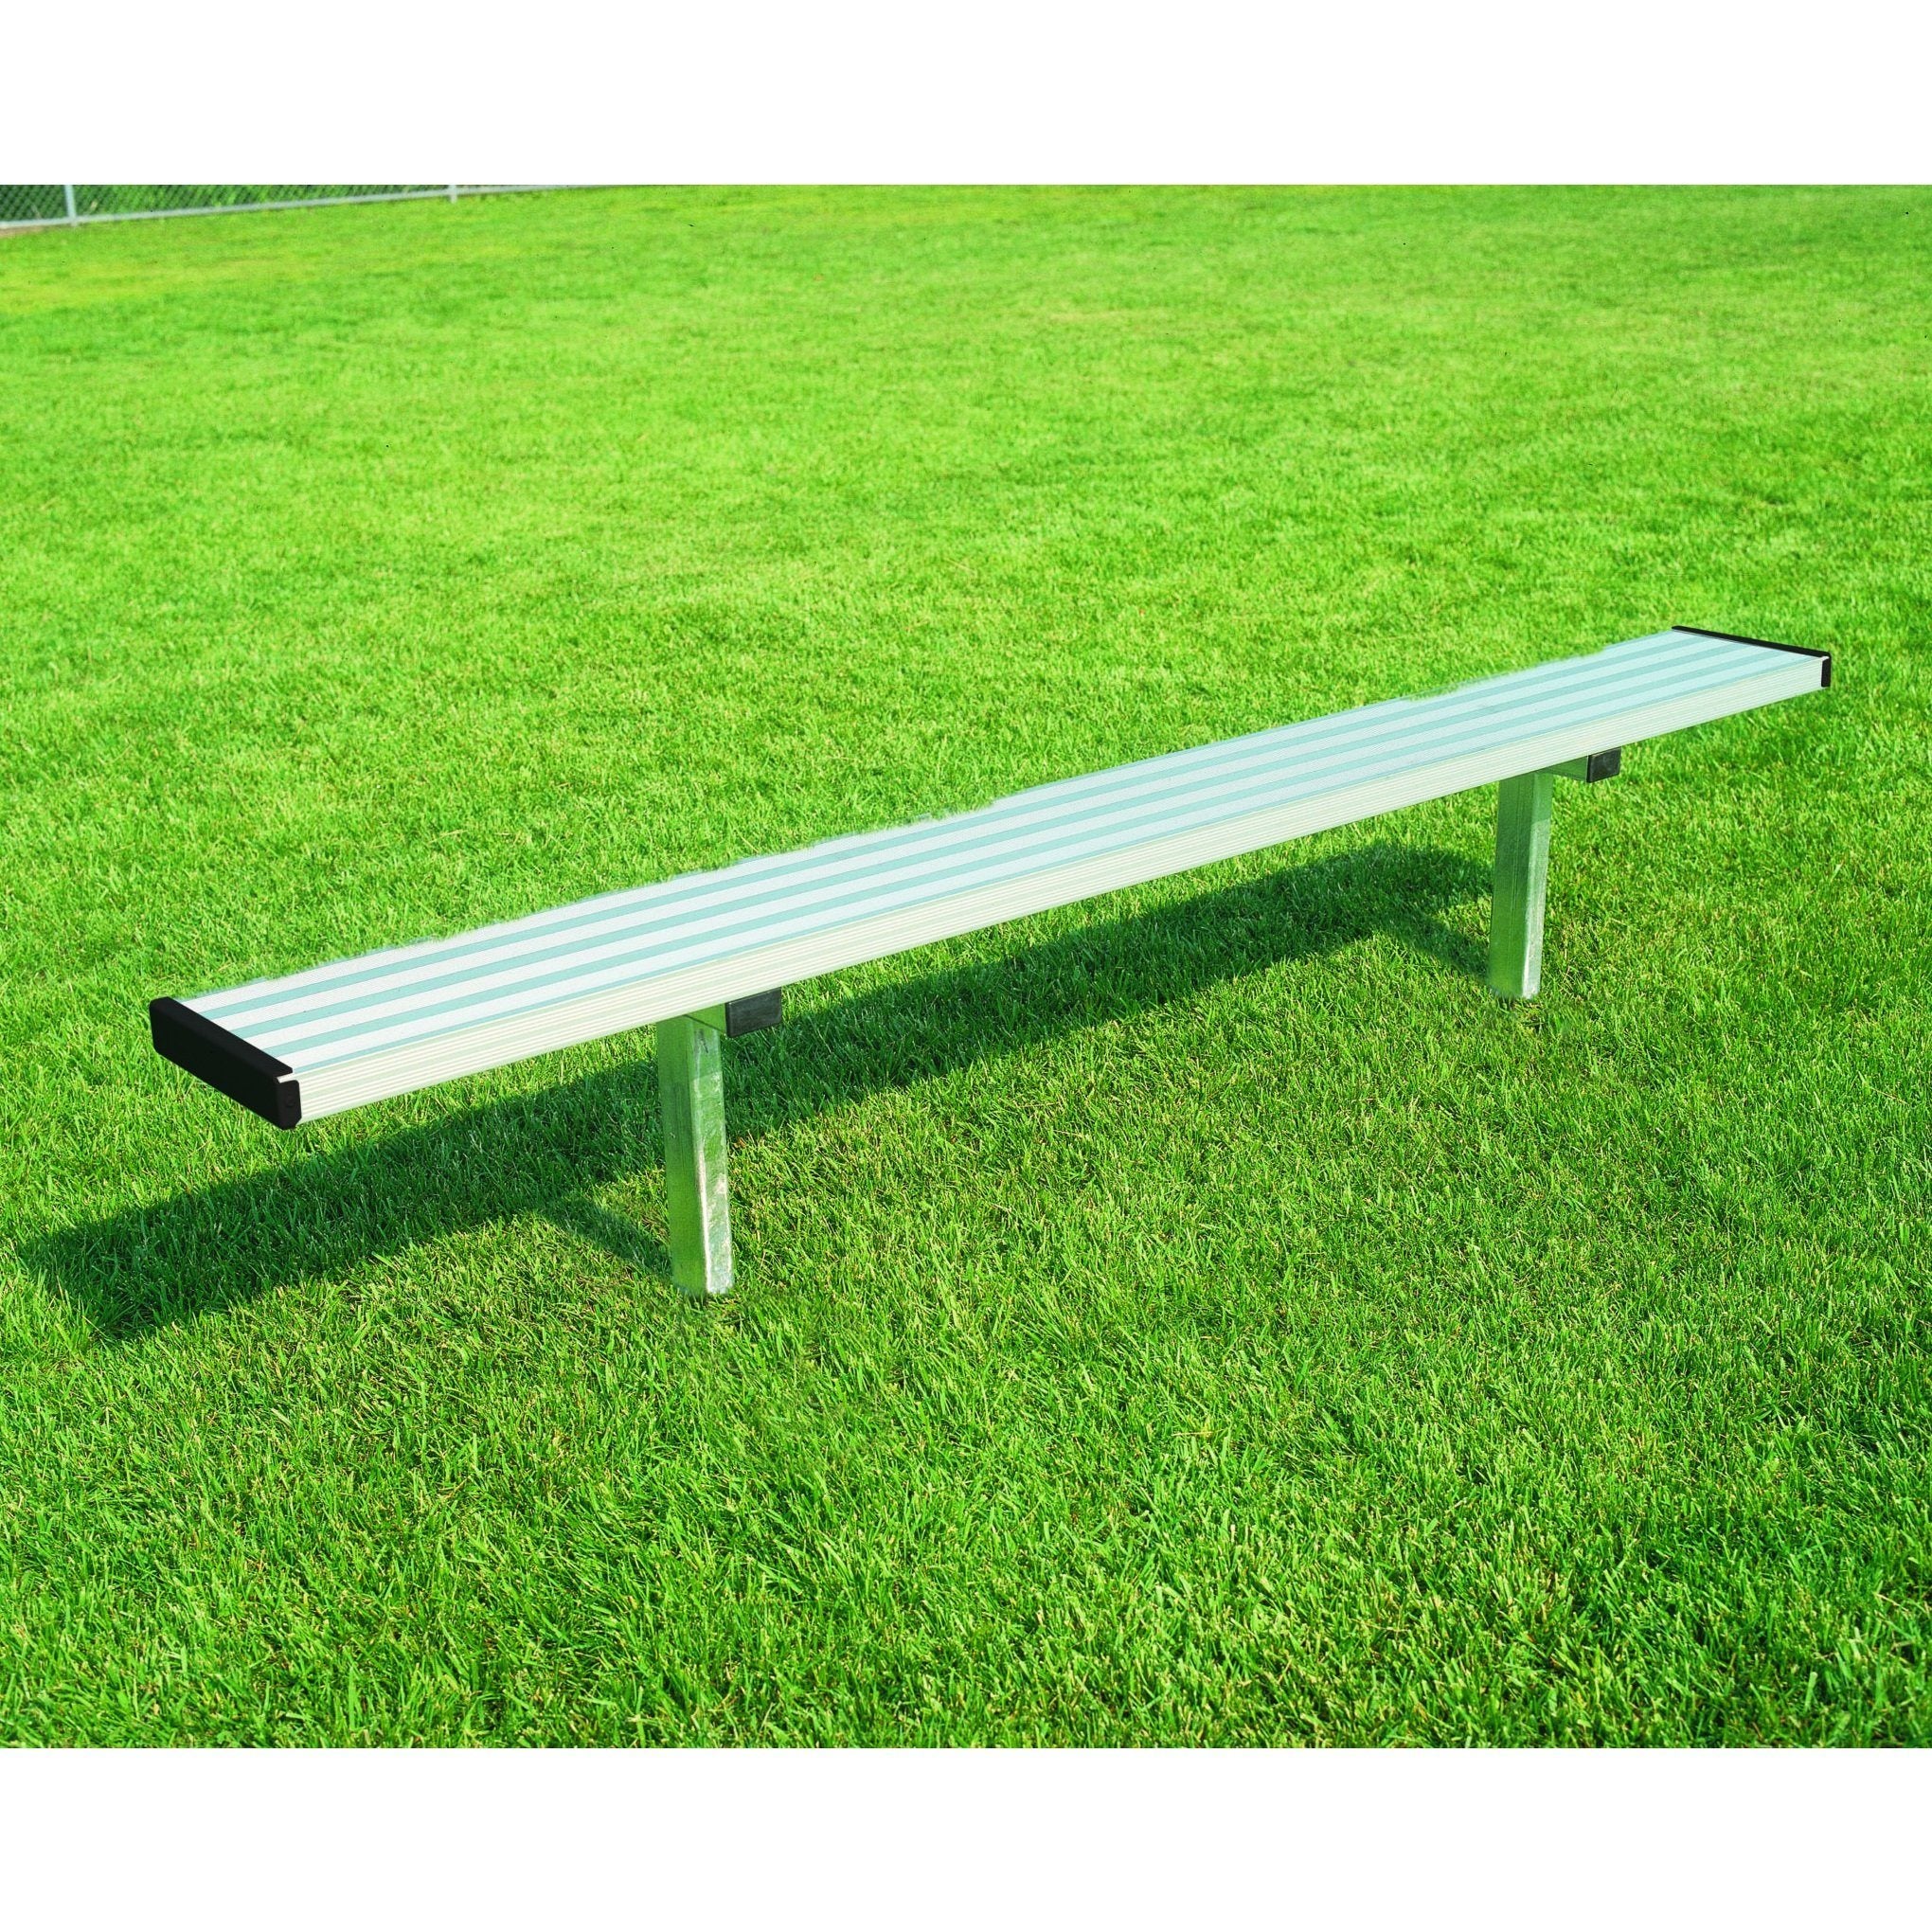 Bison Player Bench without Backrest - Pitch Pro Direct